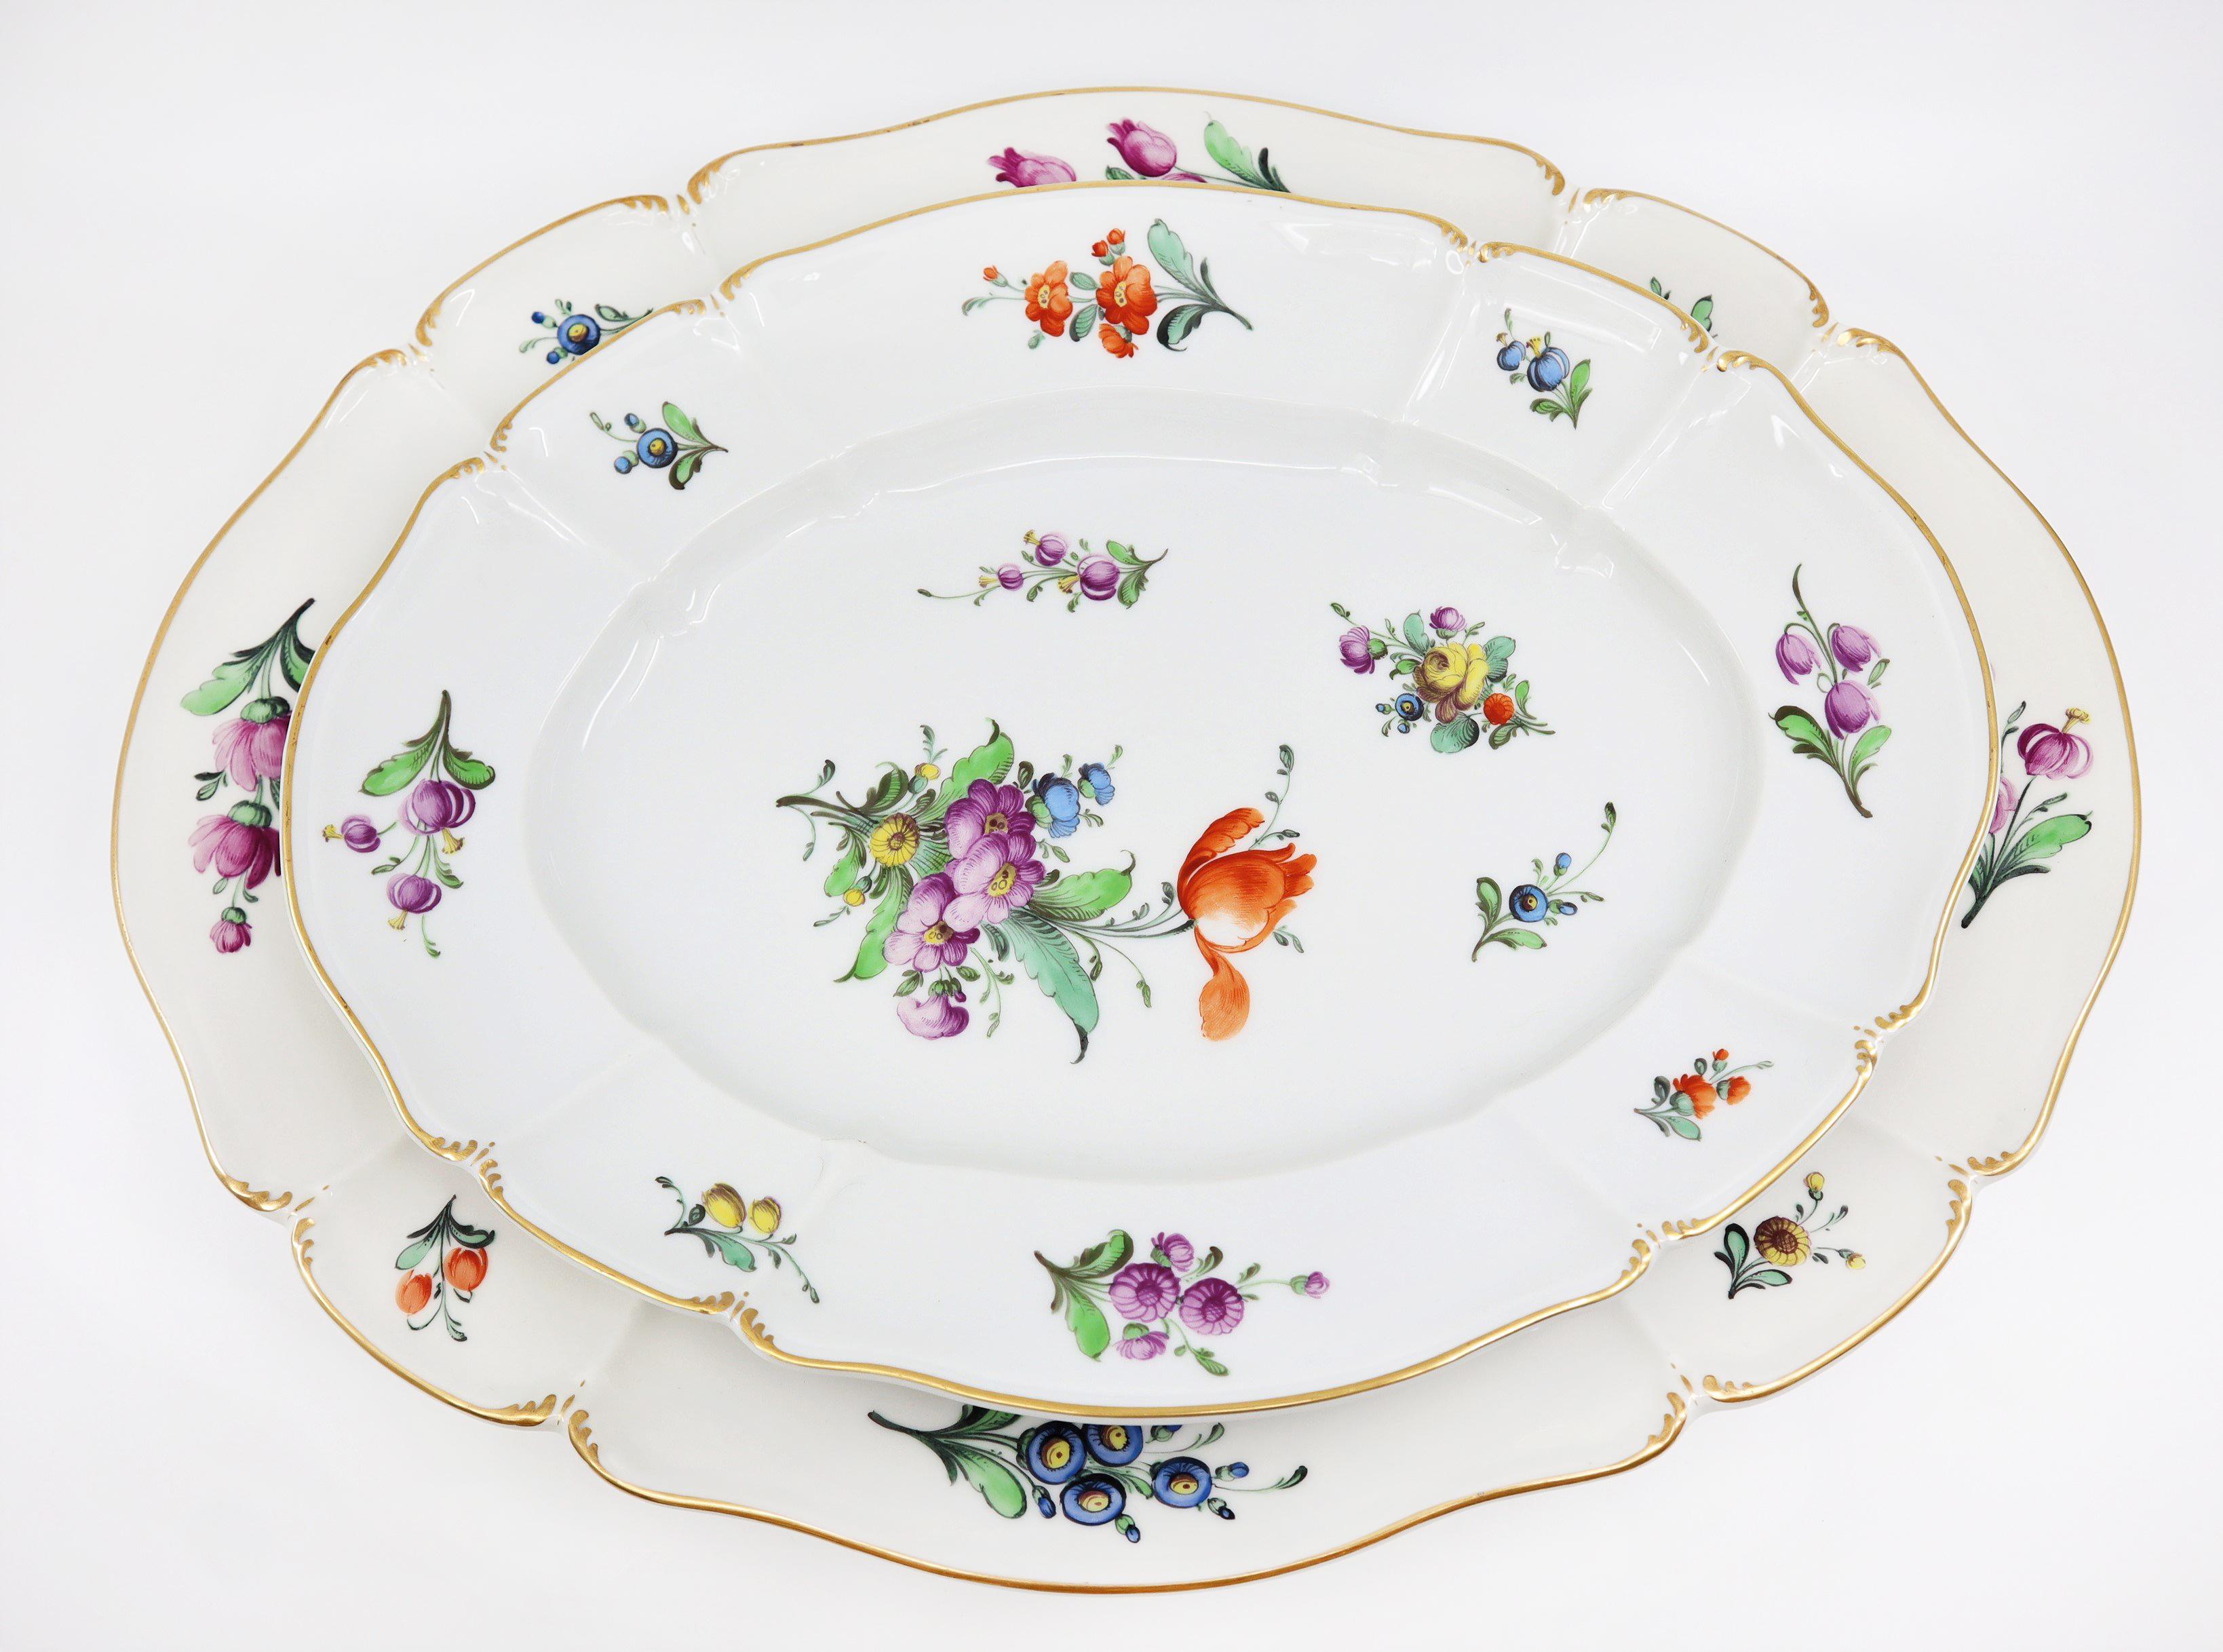 Dinner Service, 19th Century Porcelain, German, Hand Painted with Flowers Décor 5